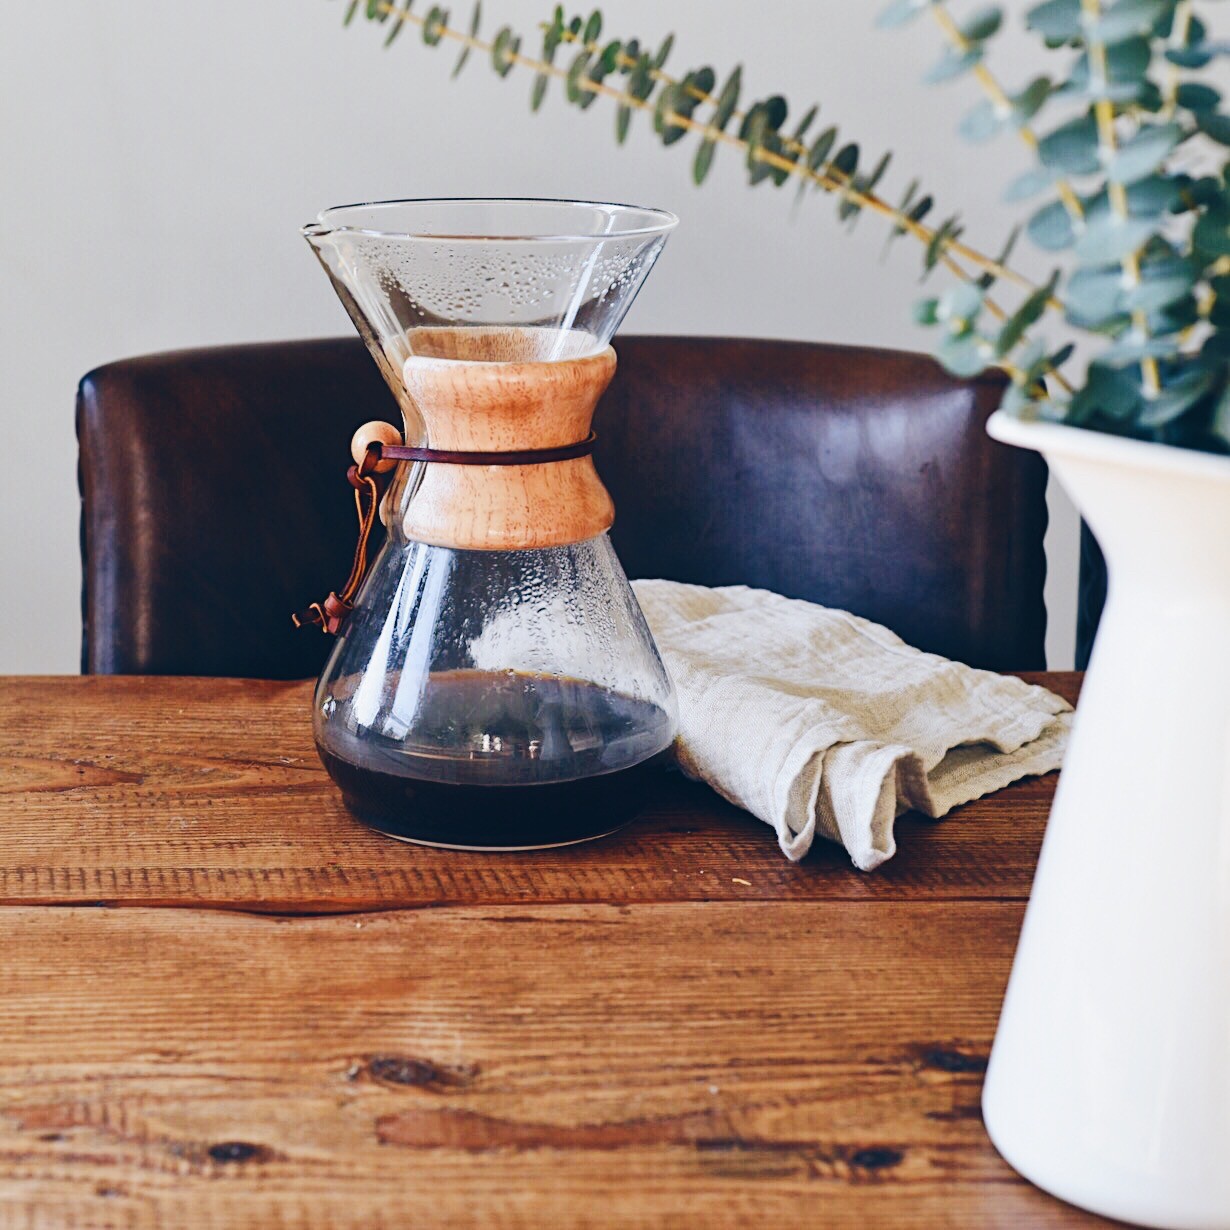 Sorry, But I Do Not Love the Chemex